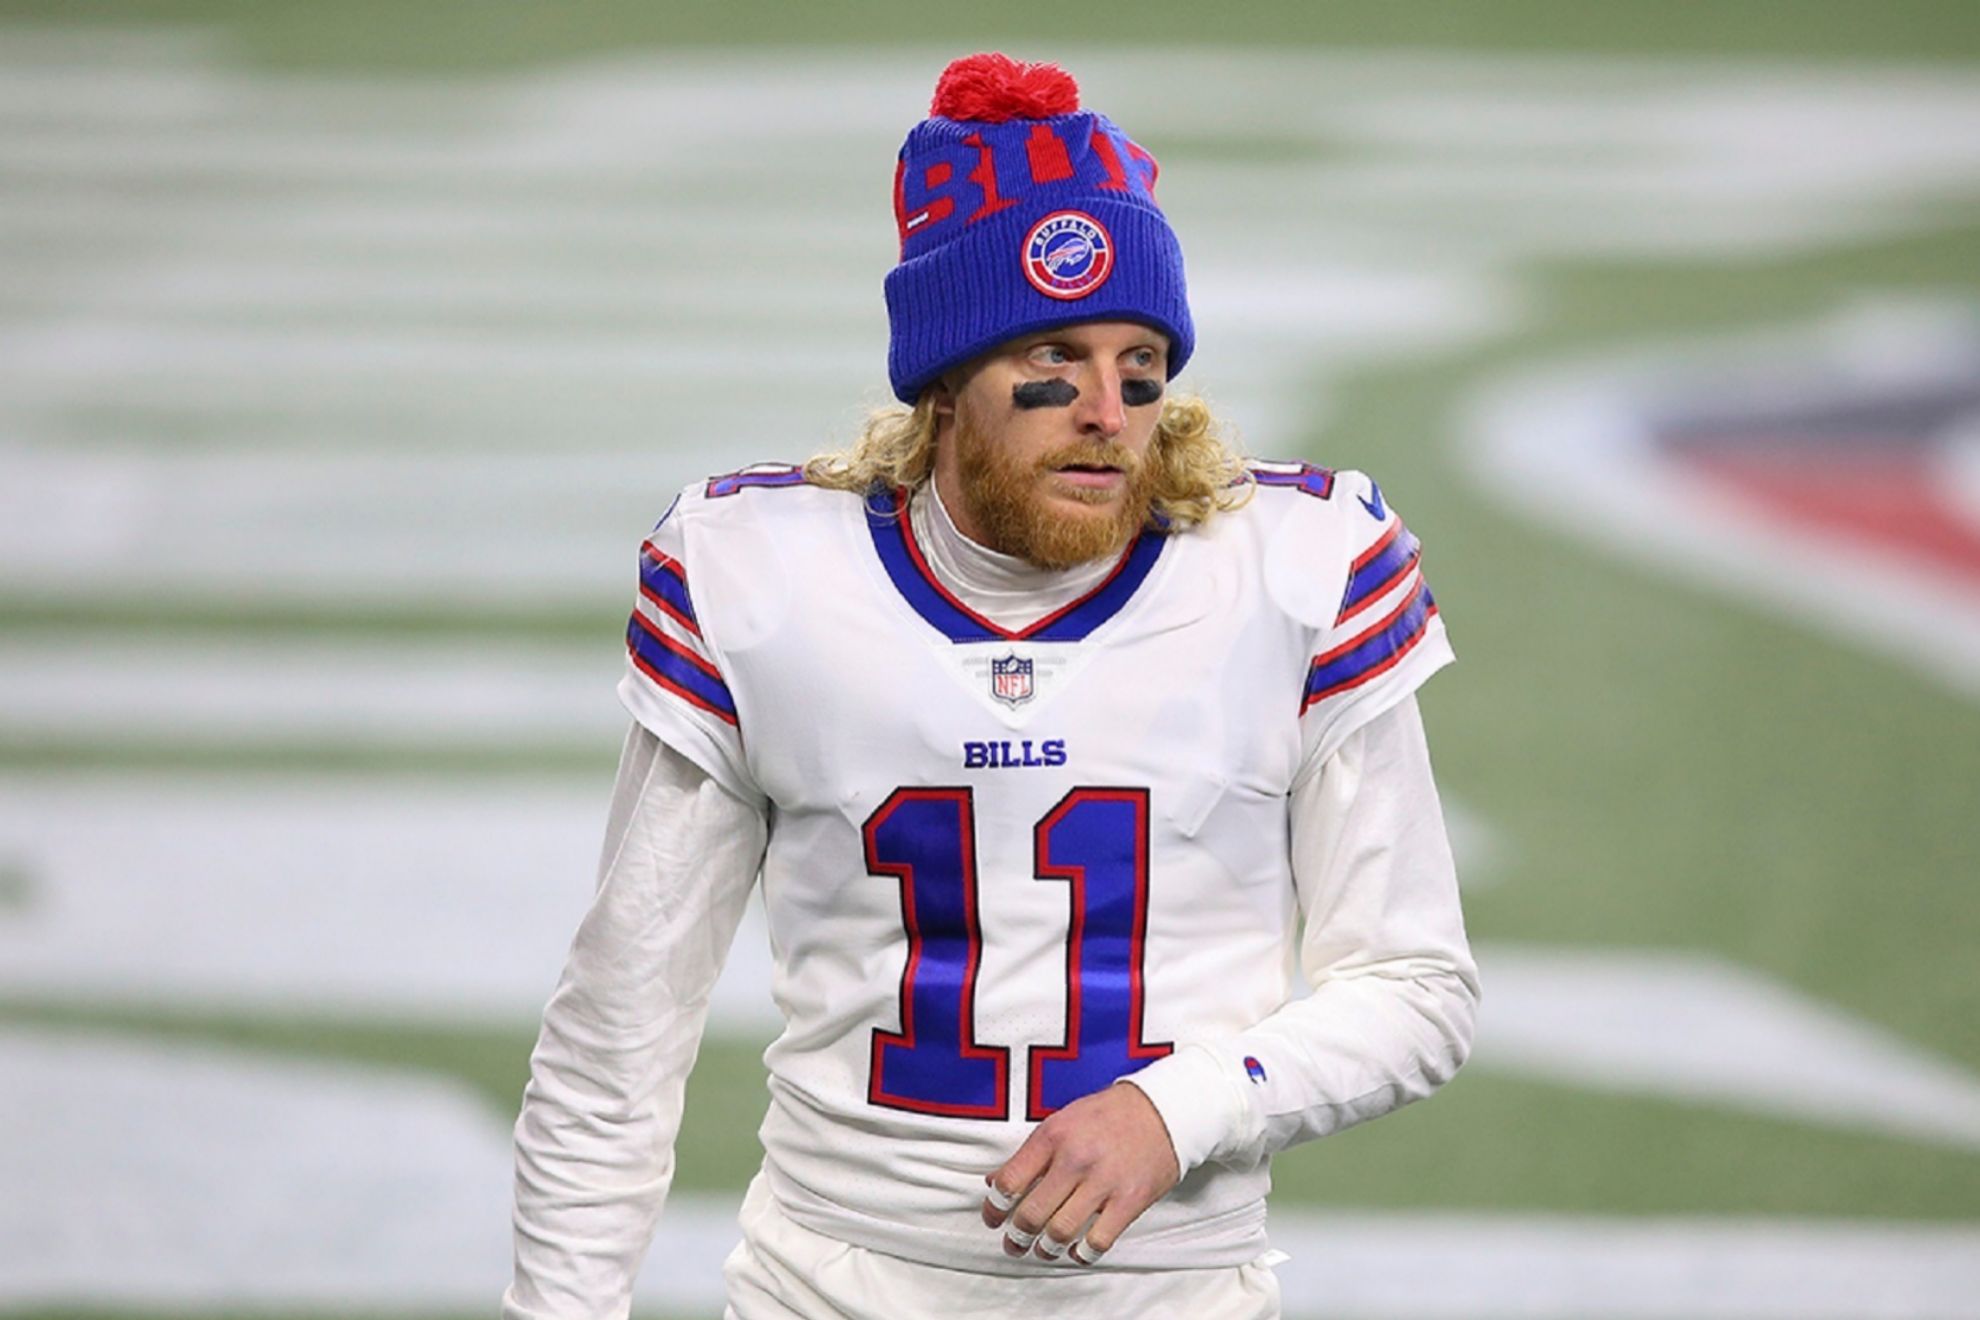 Cole Beasley says things changed with Buffalo Bills after declining vaccine